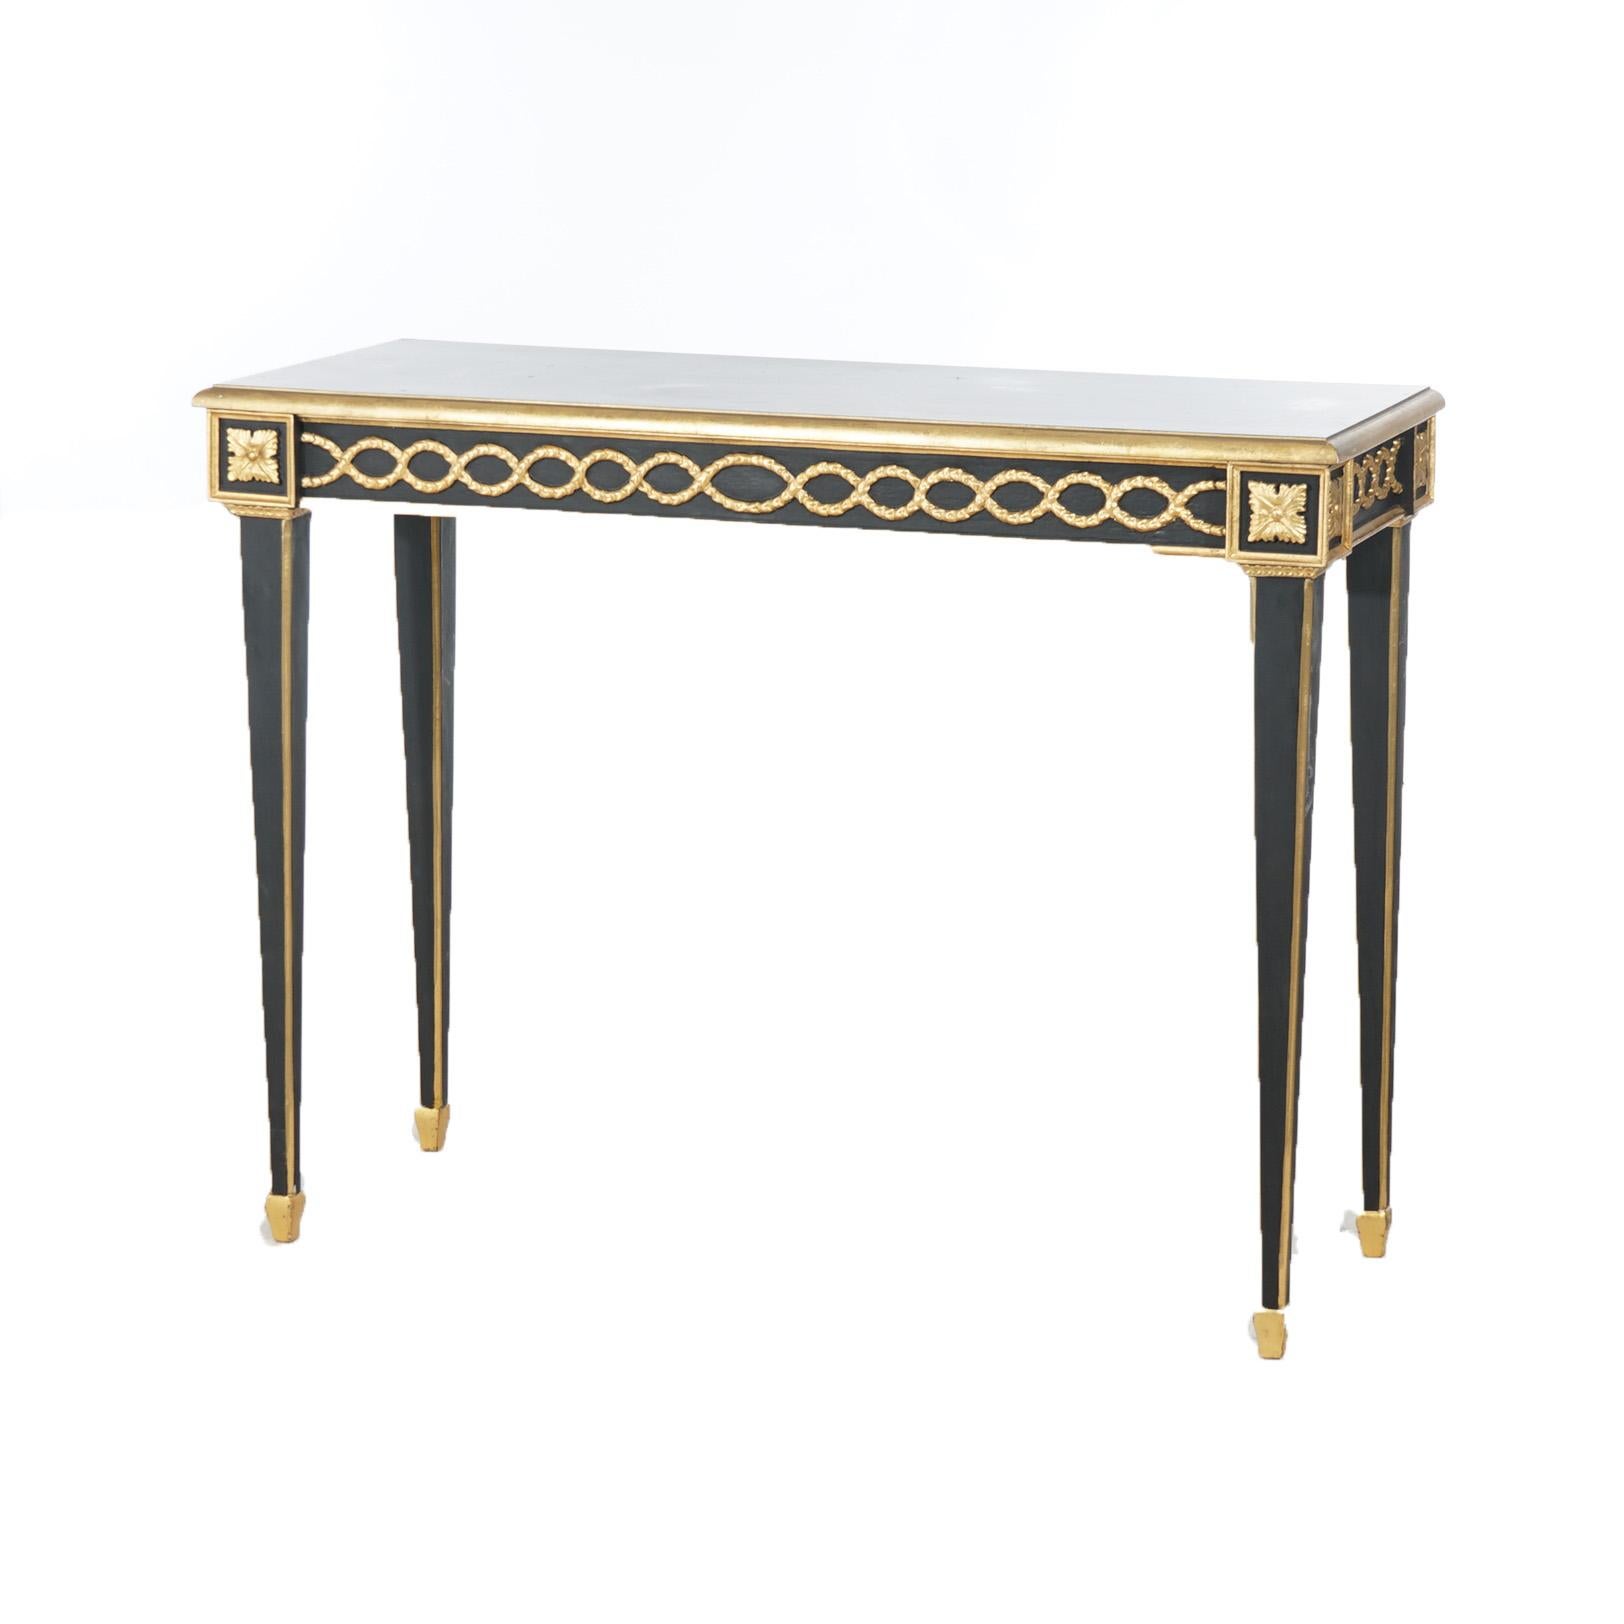 ***Ask About Reduced In-House Shipping Rates - Reliable Service & Fully Insured***
A French Empire style console table offers ebonized wood construction with gilt foliate, rosette and pinstripe highlights, raised on square and tapered legs, 20th